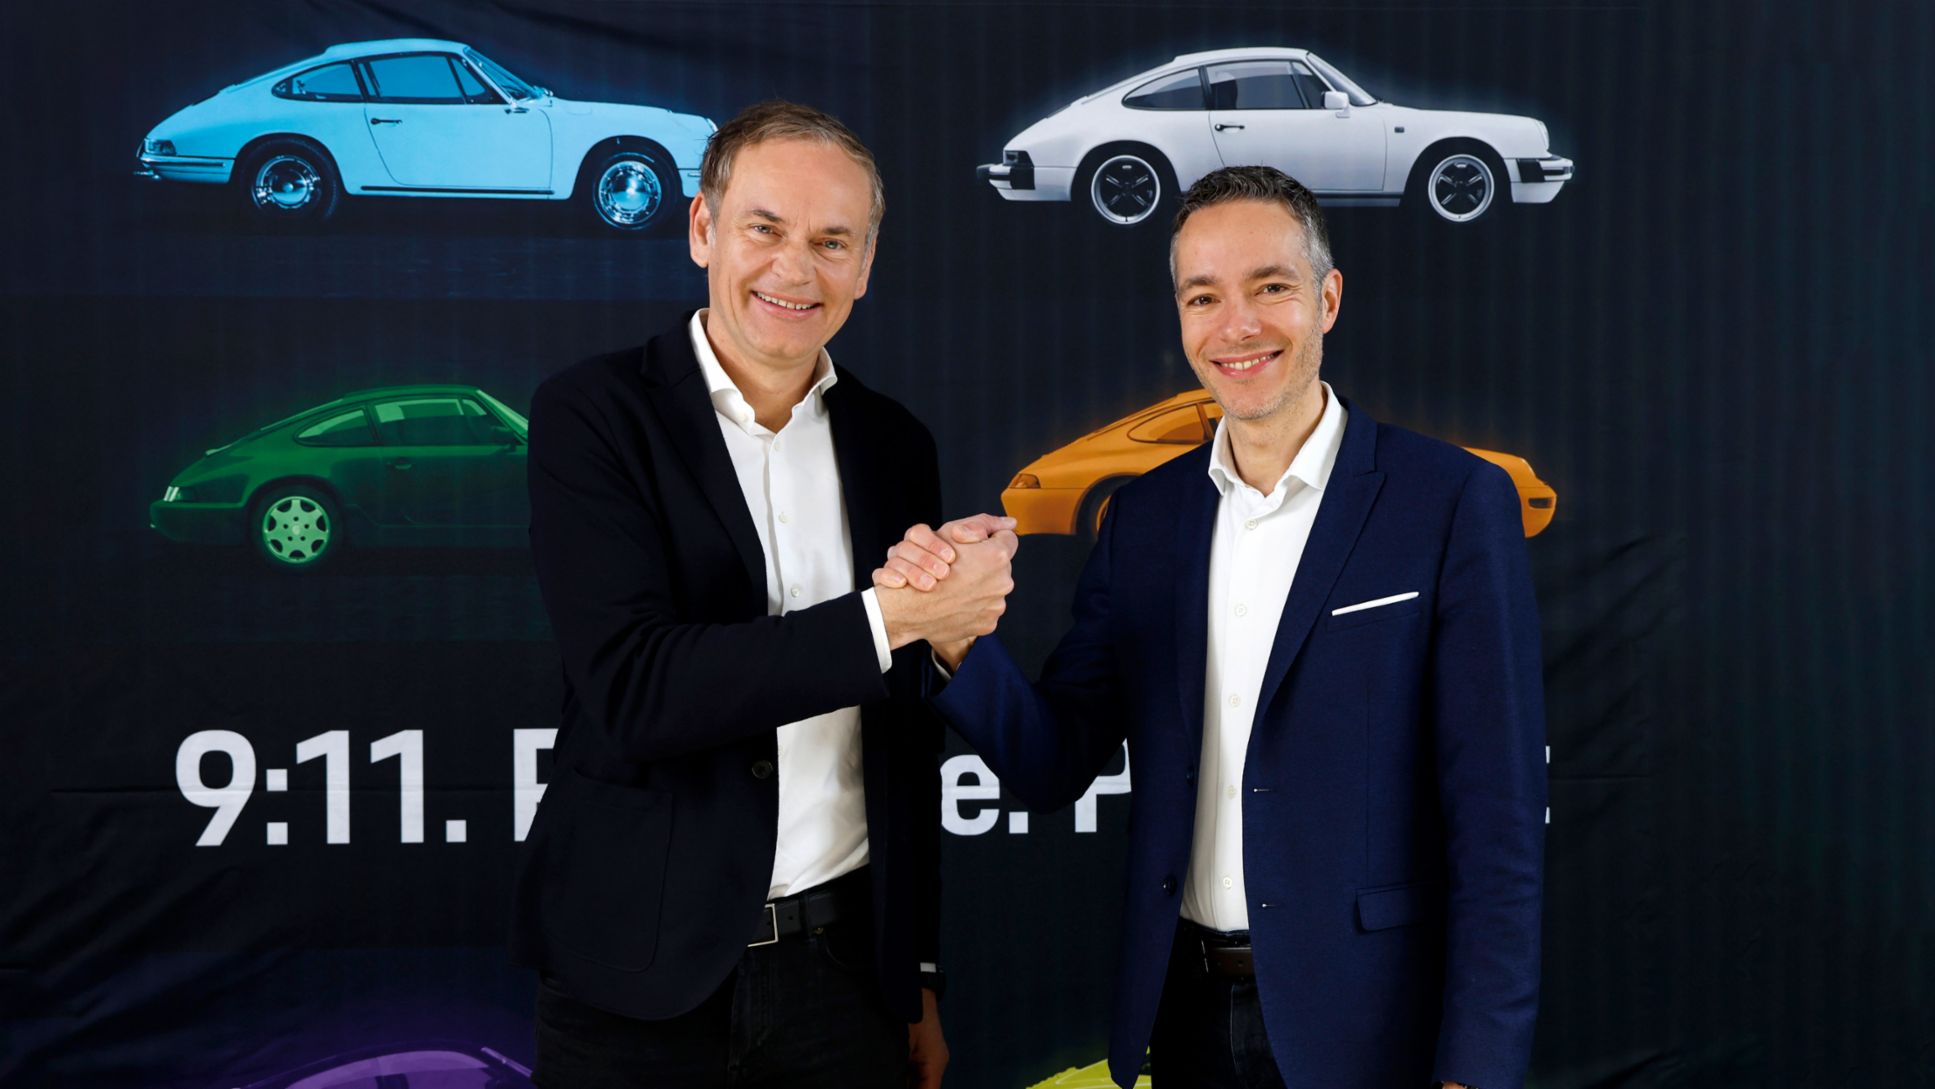 Oliver Blume, Chairman of the Executive Board, Sebastian Rudolph Vice President Communications, Sustainability and Politics, 2024, Porsche AG